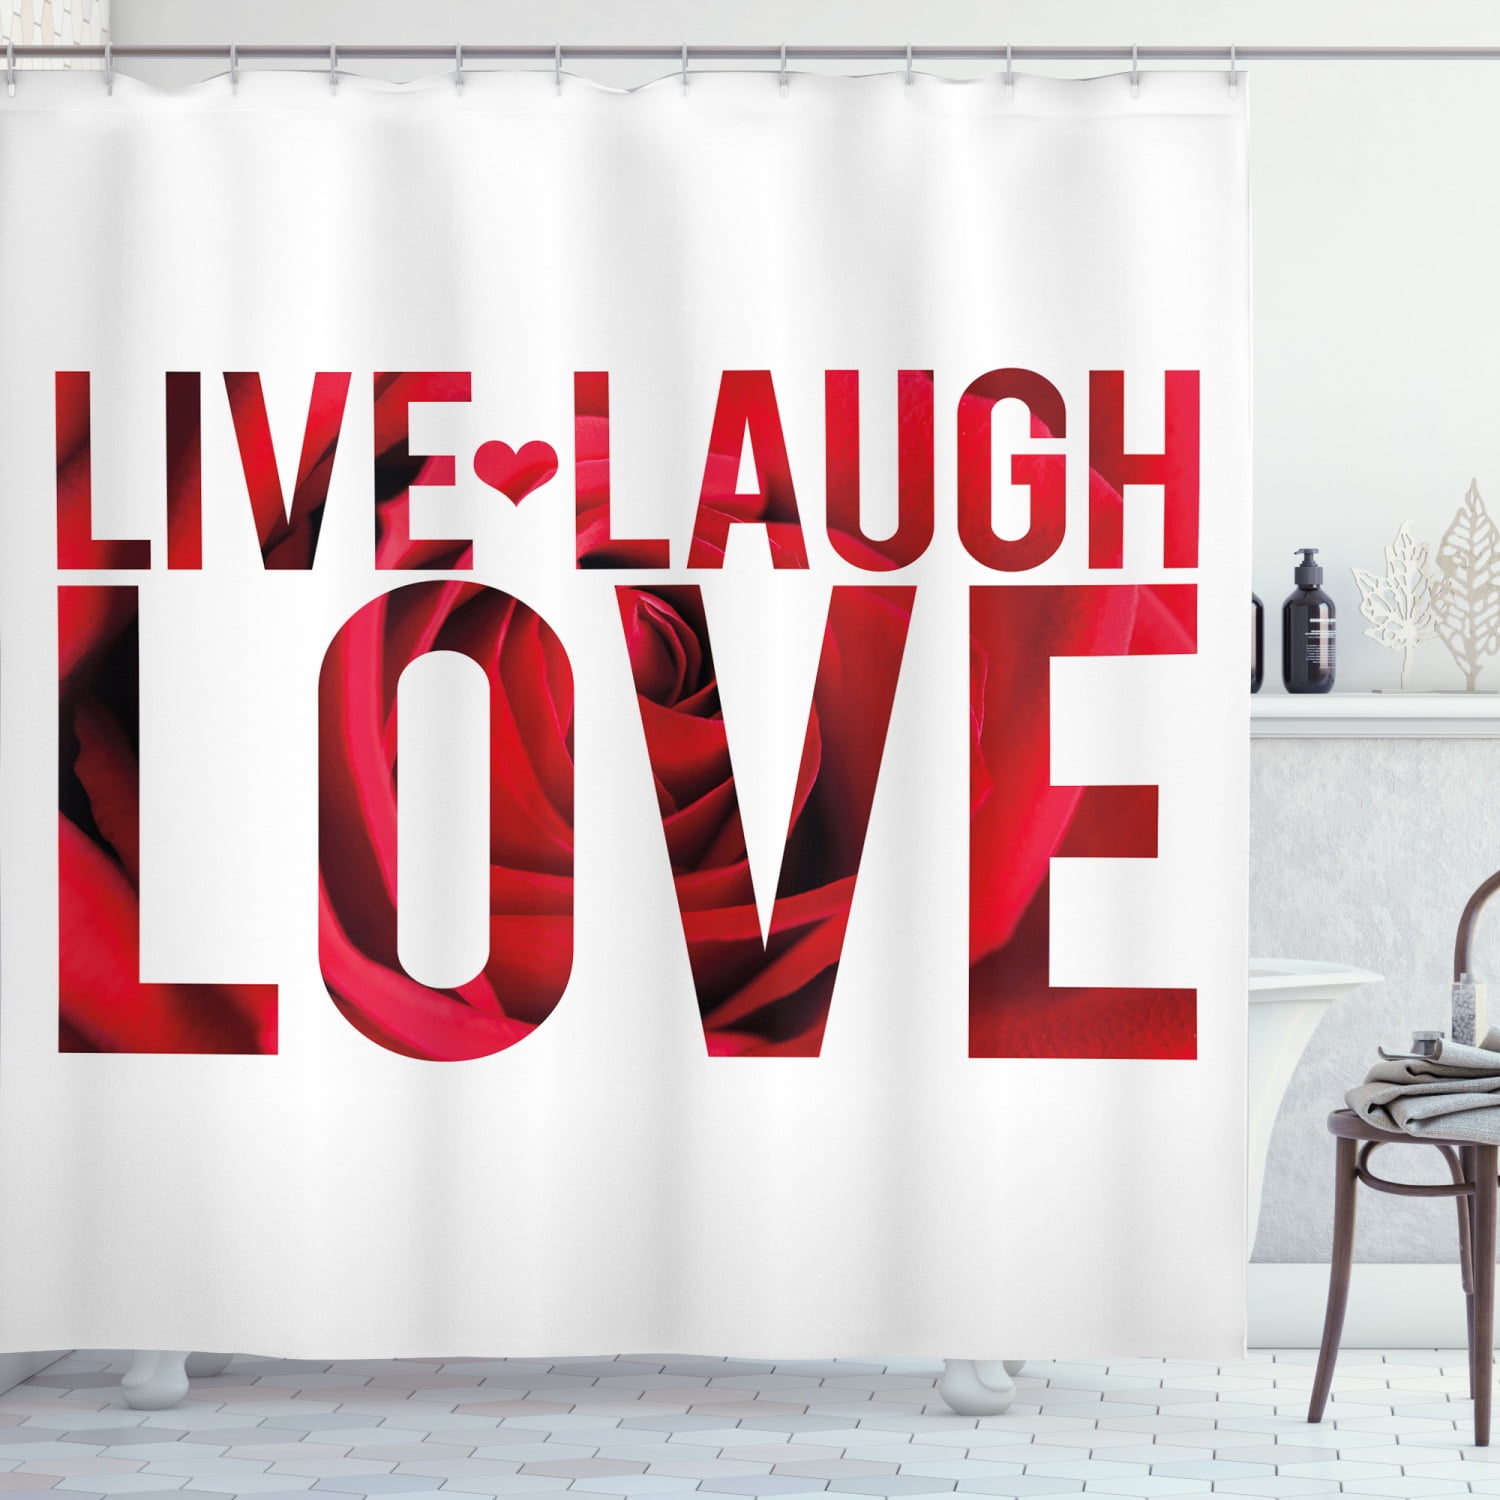 Anchor Live Laugh Love Shower Curtain Set Polyester Fabric Bathroom w/12 Hooks 